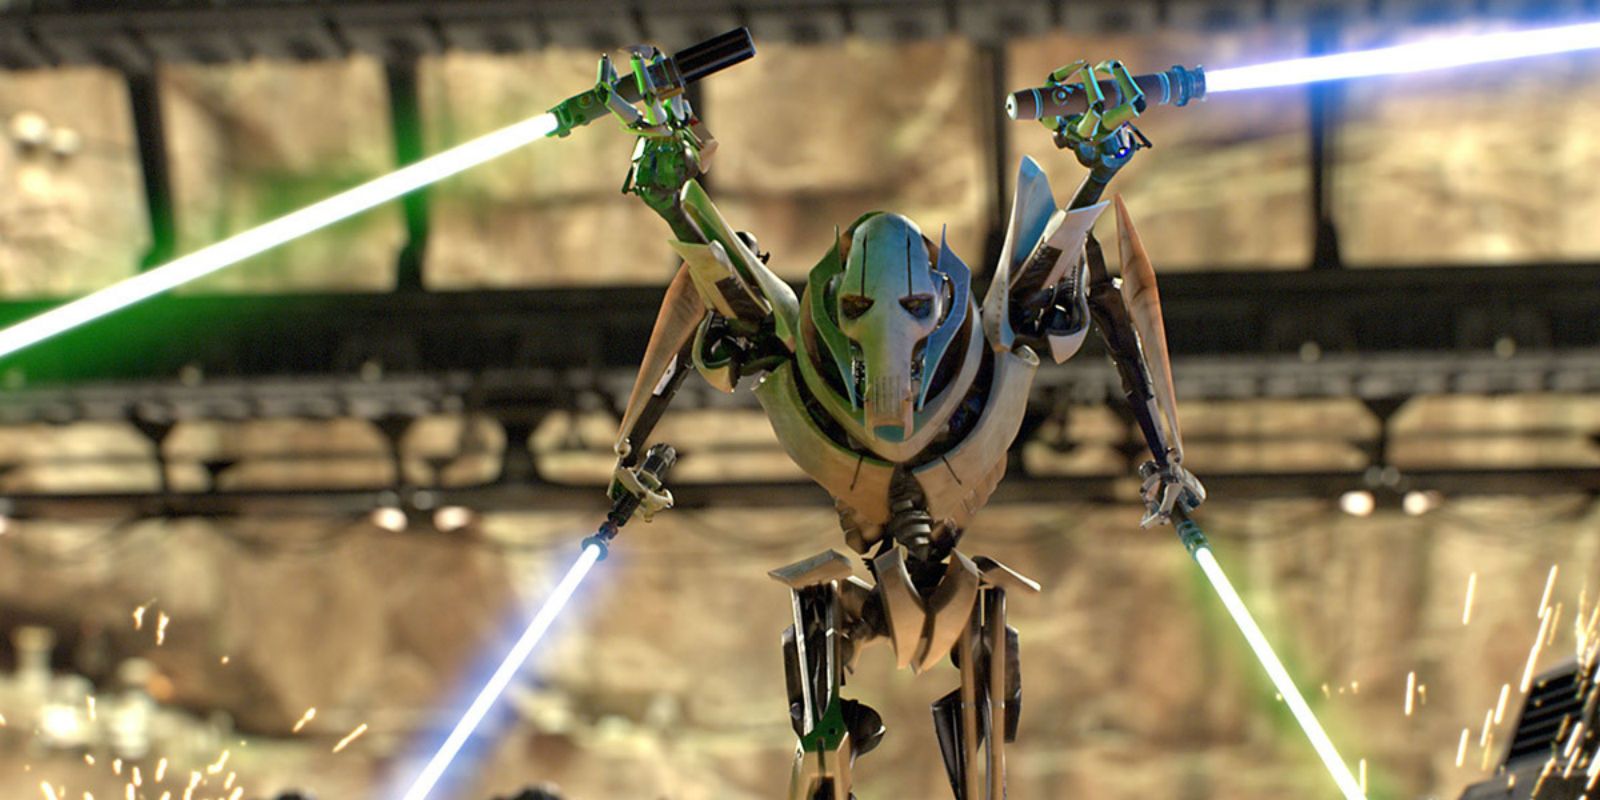 General Grievous wielding four lightsabers in Revenge of the Sith